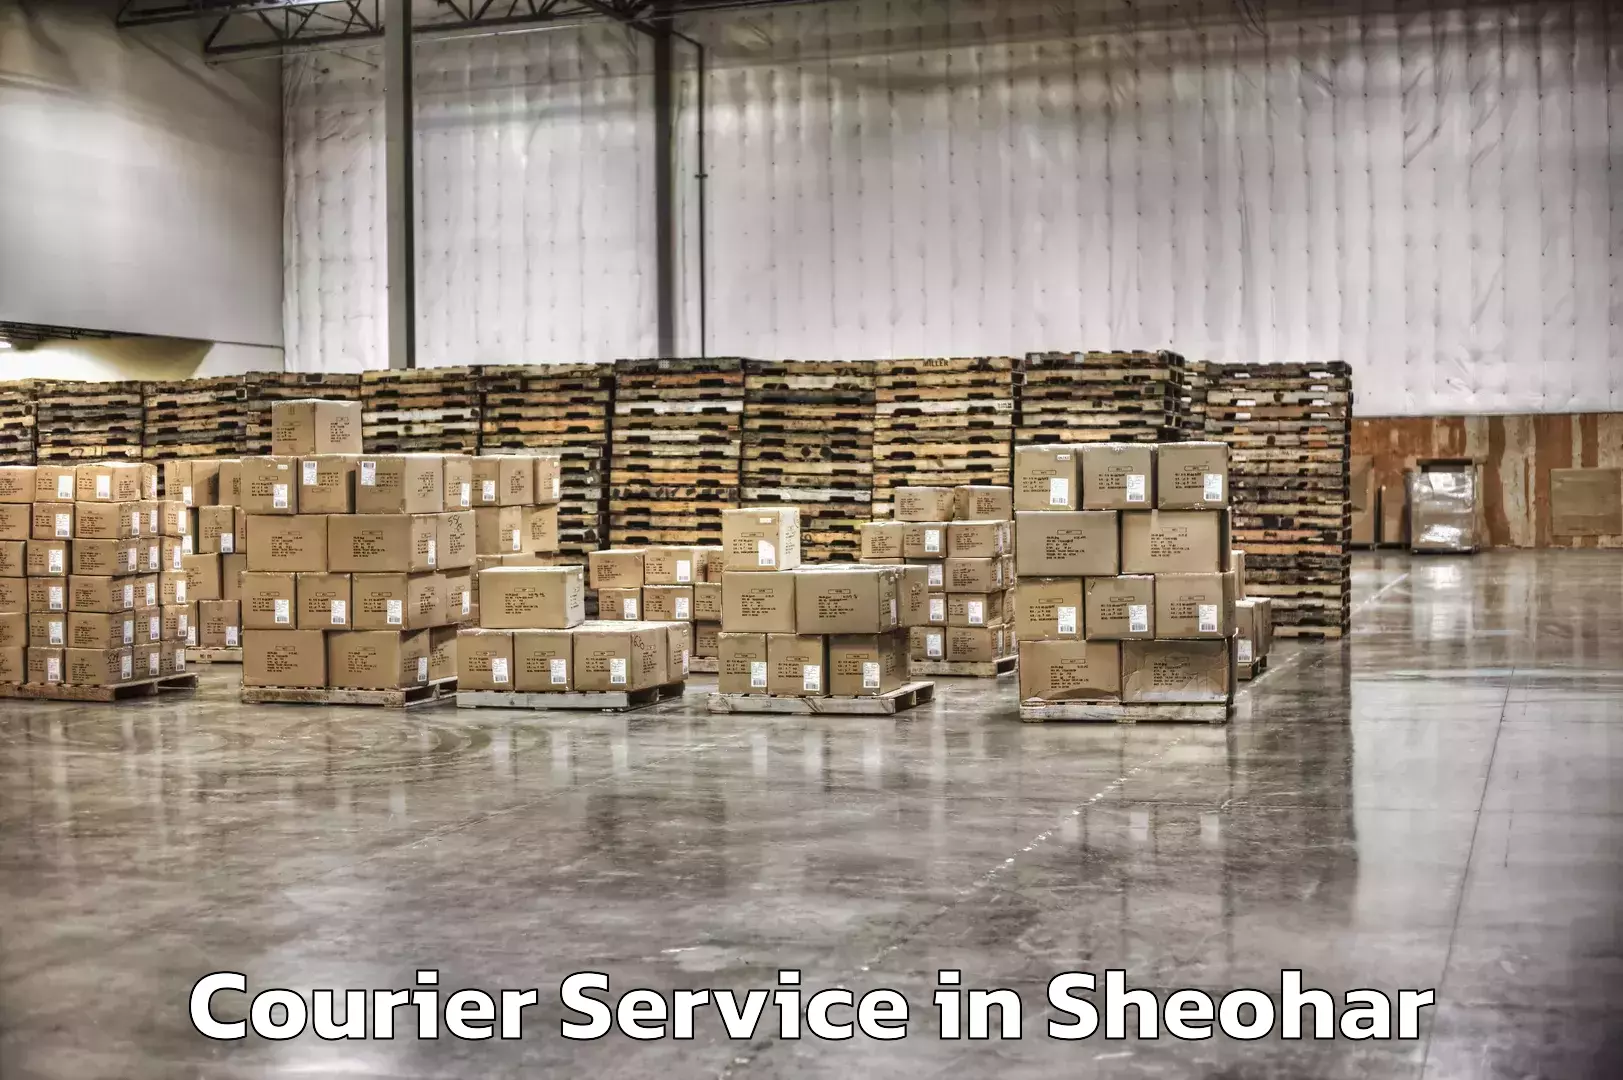 Shipping and handling in Sheohar